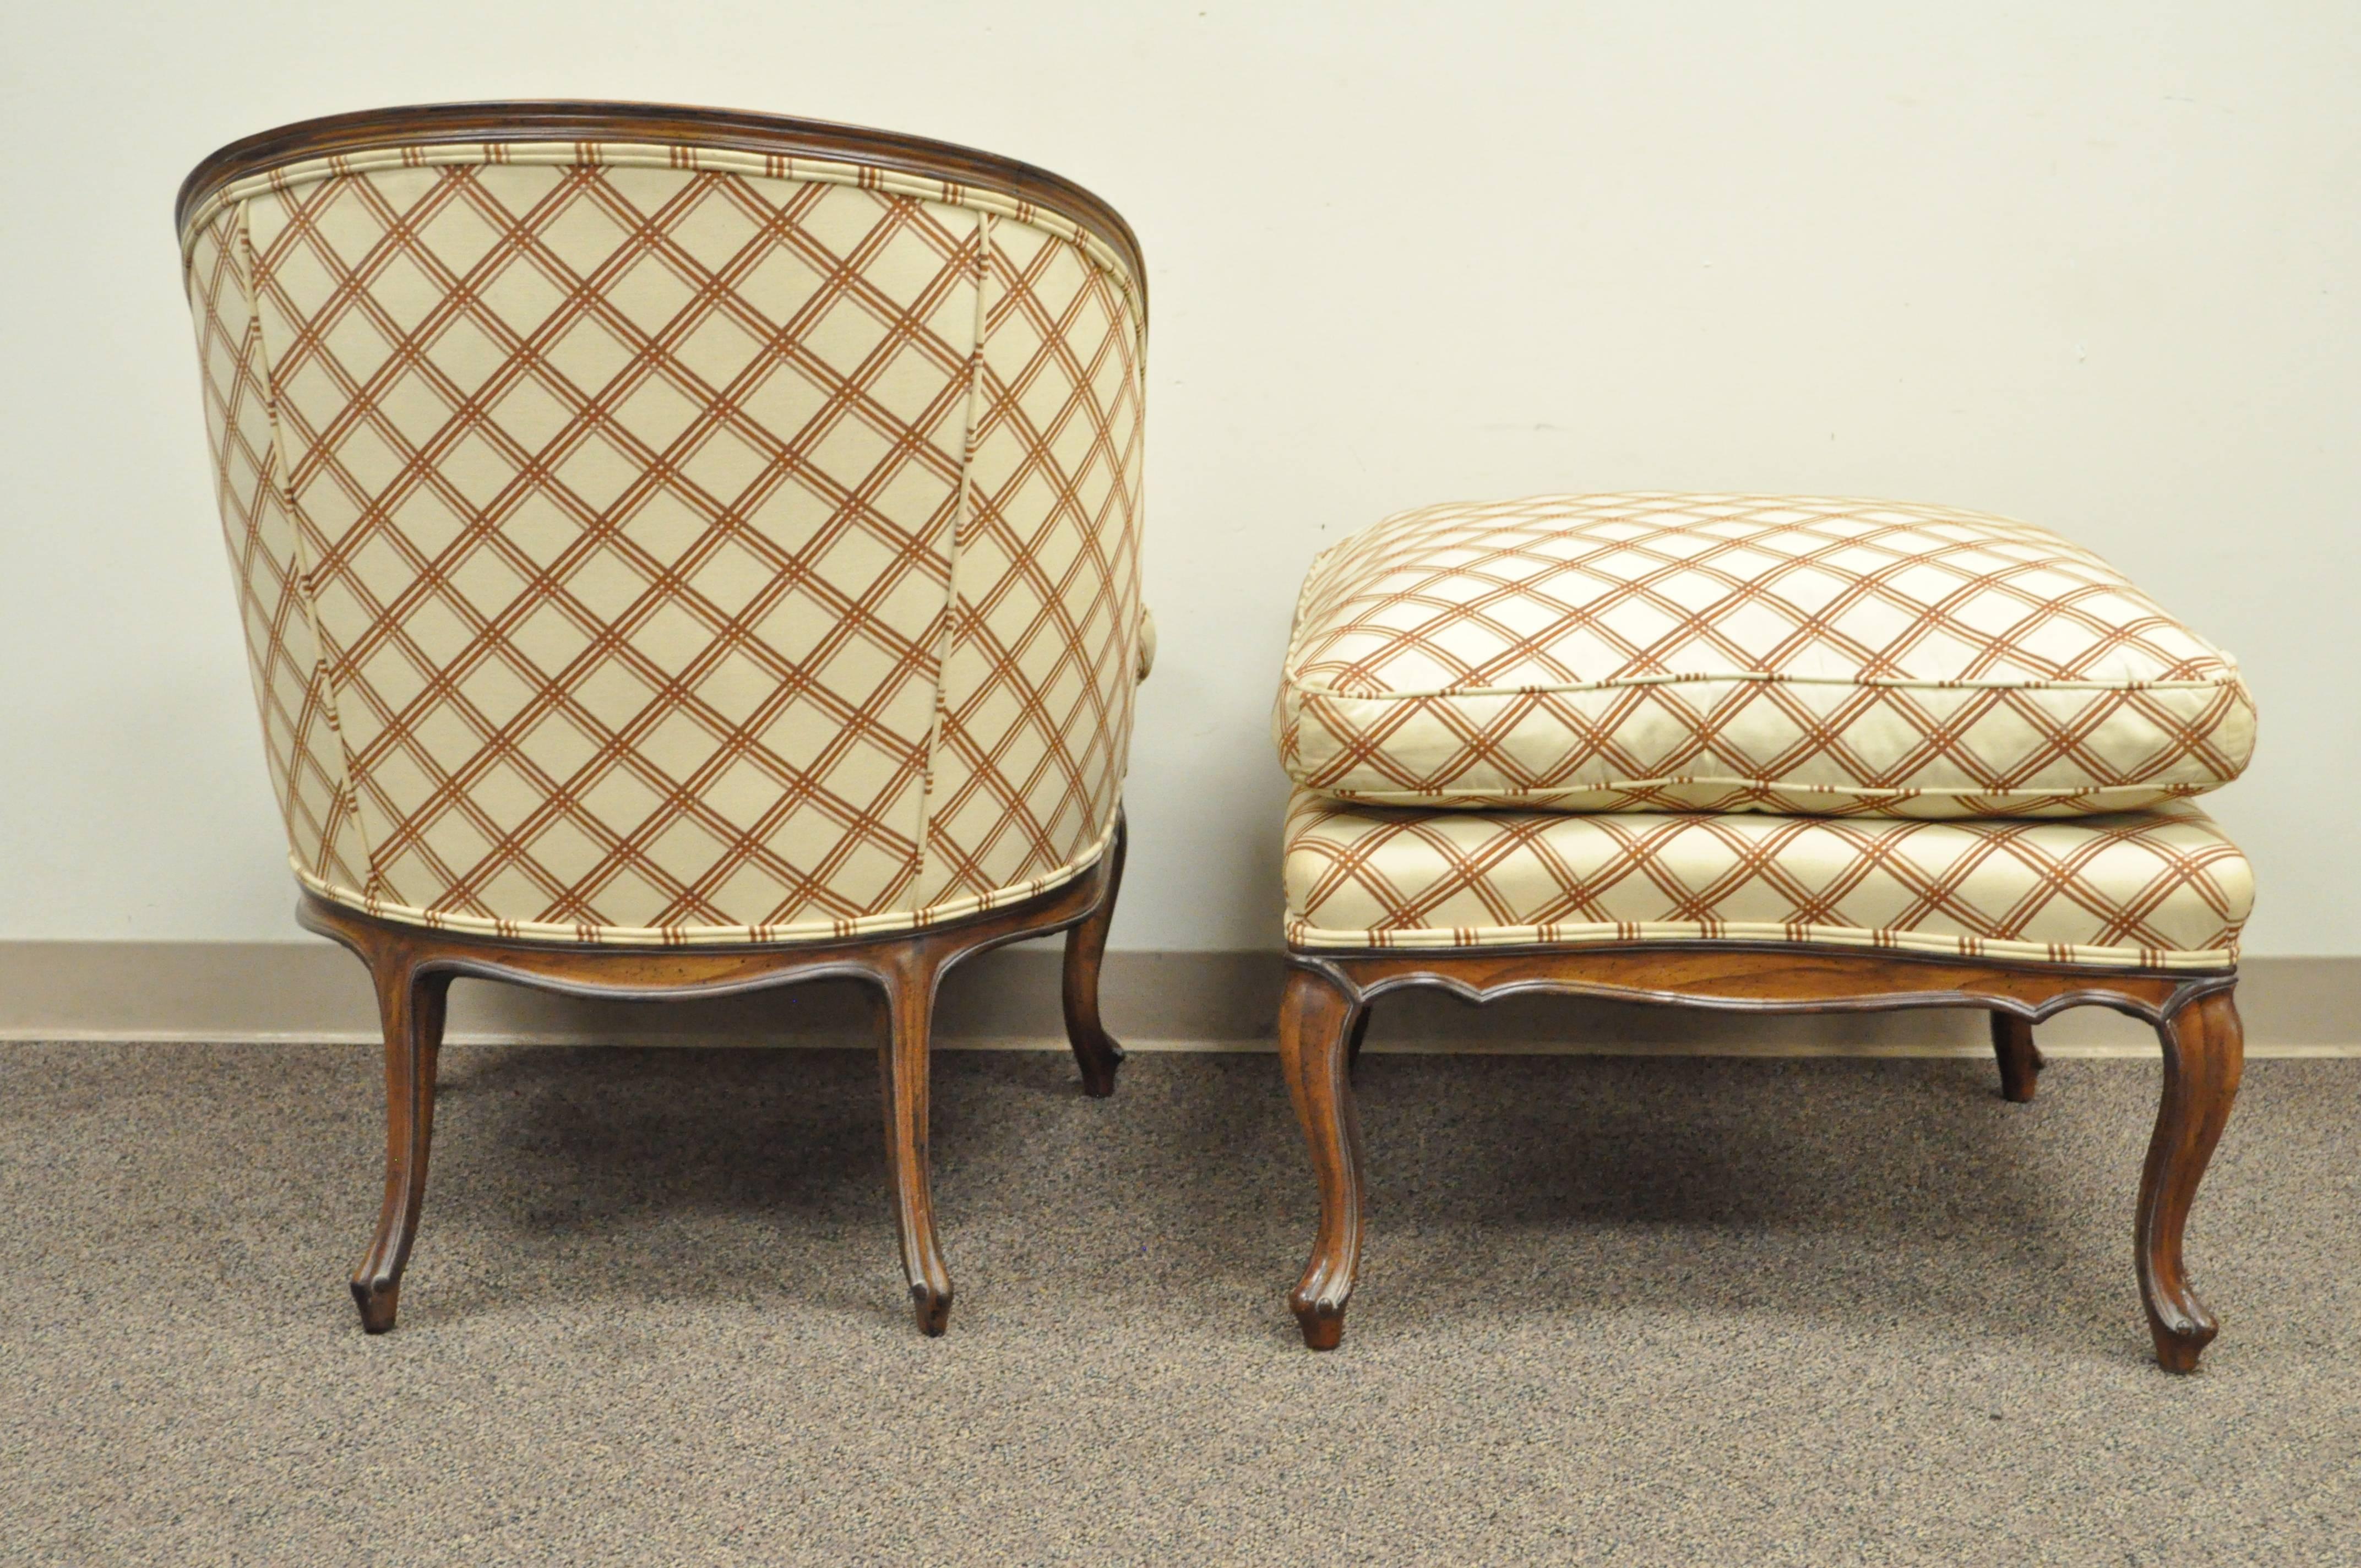 Mid-20th Century Vintage Country French Louis XV Style Barrel Back Bergere Lounge Chair & Ottoman